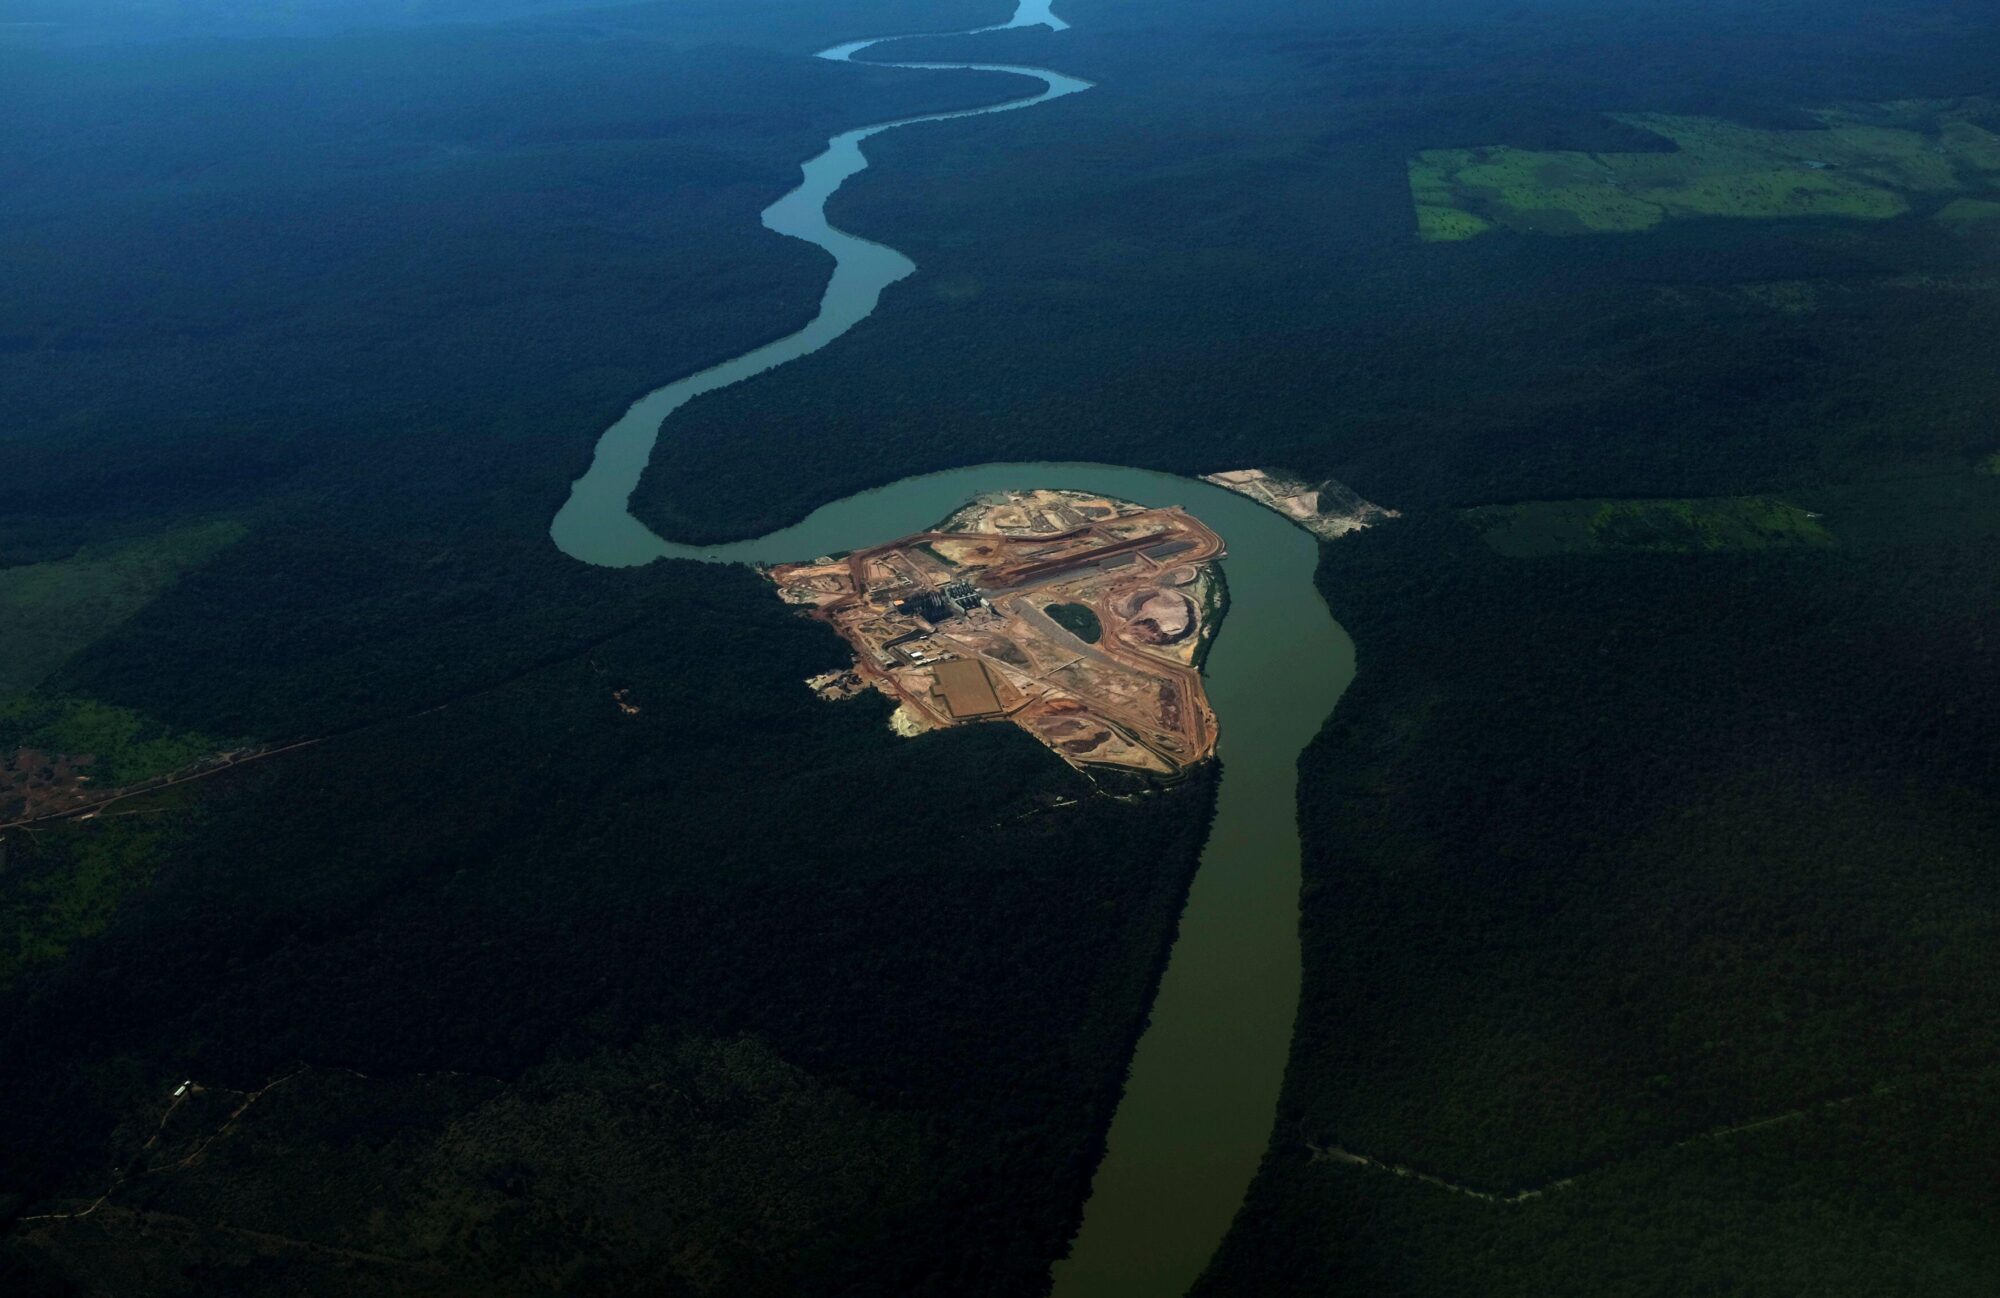 <p>An aerial view of the construction of a hydroelectric plant on the Teles Pires River, near the city of Alta Floresta, in Brazil&#8217;s state of Pará. Despite alarming potential socio-environmental impacts, the federal government is considering building three large plants in the Amazon. (Image: Reuters / Alamy)</p>